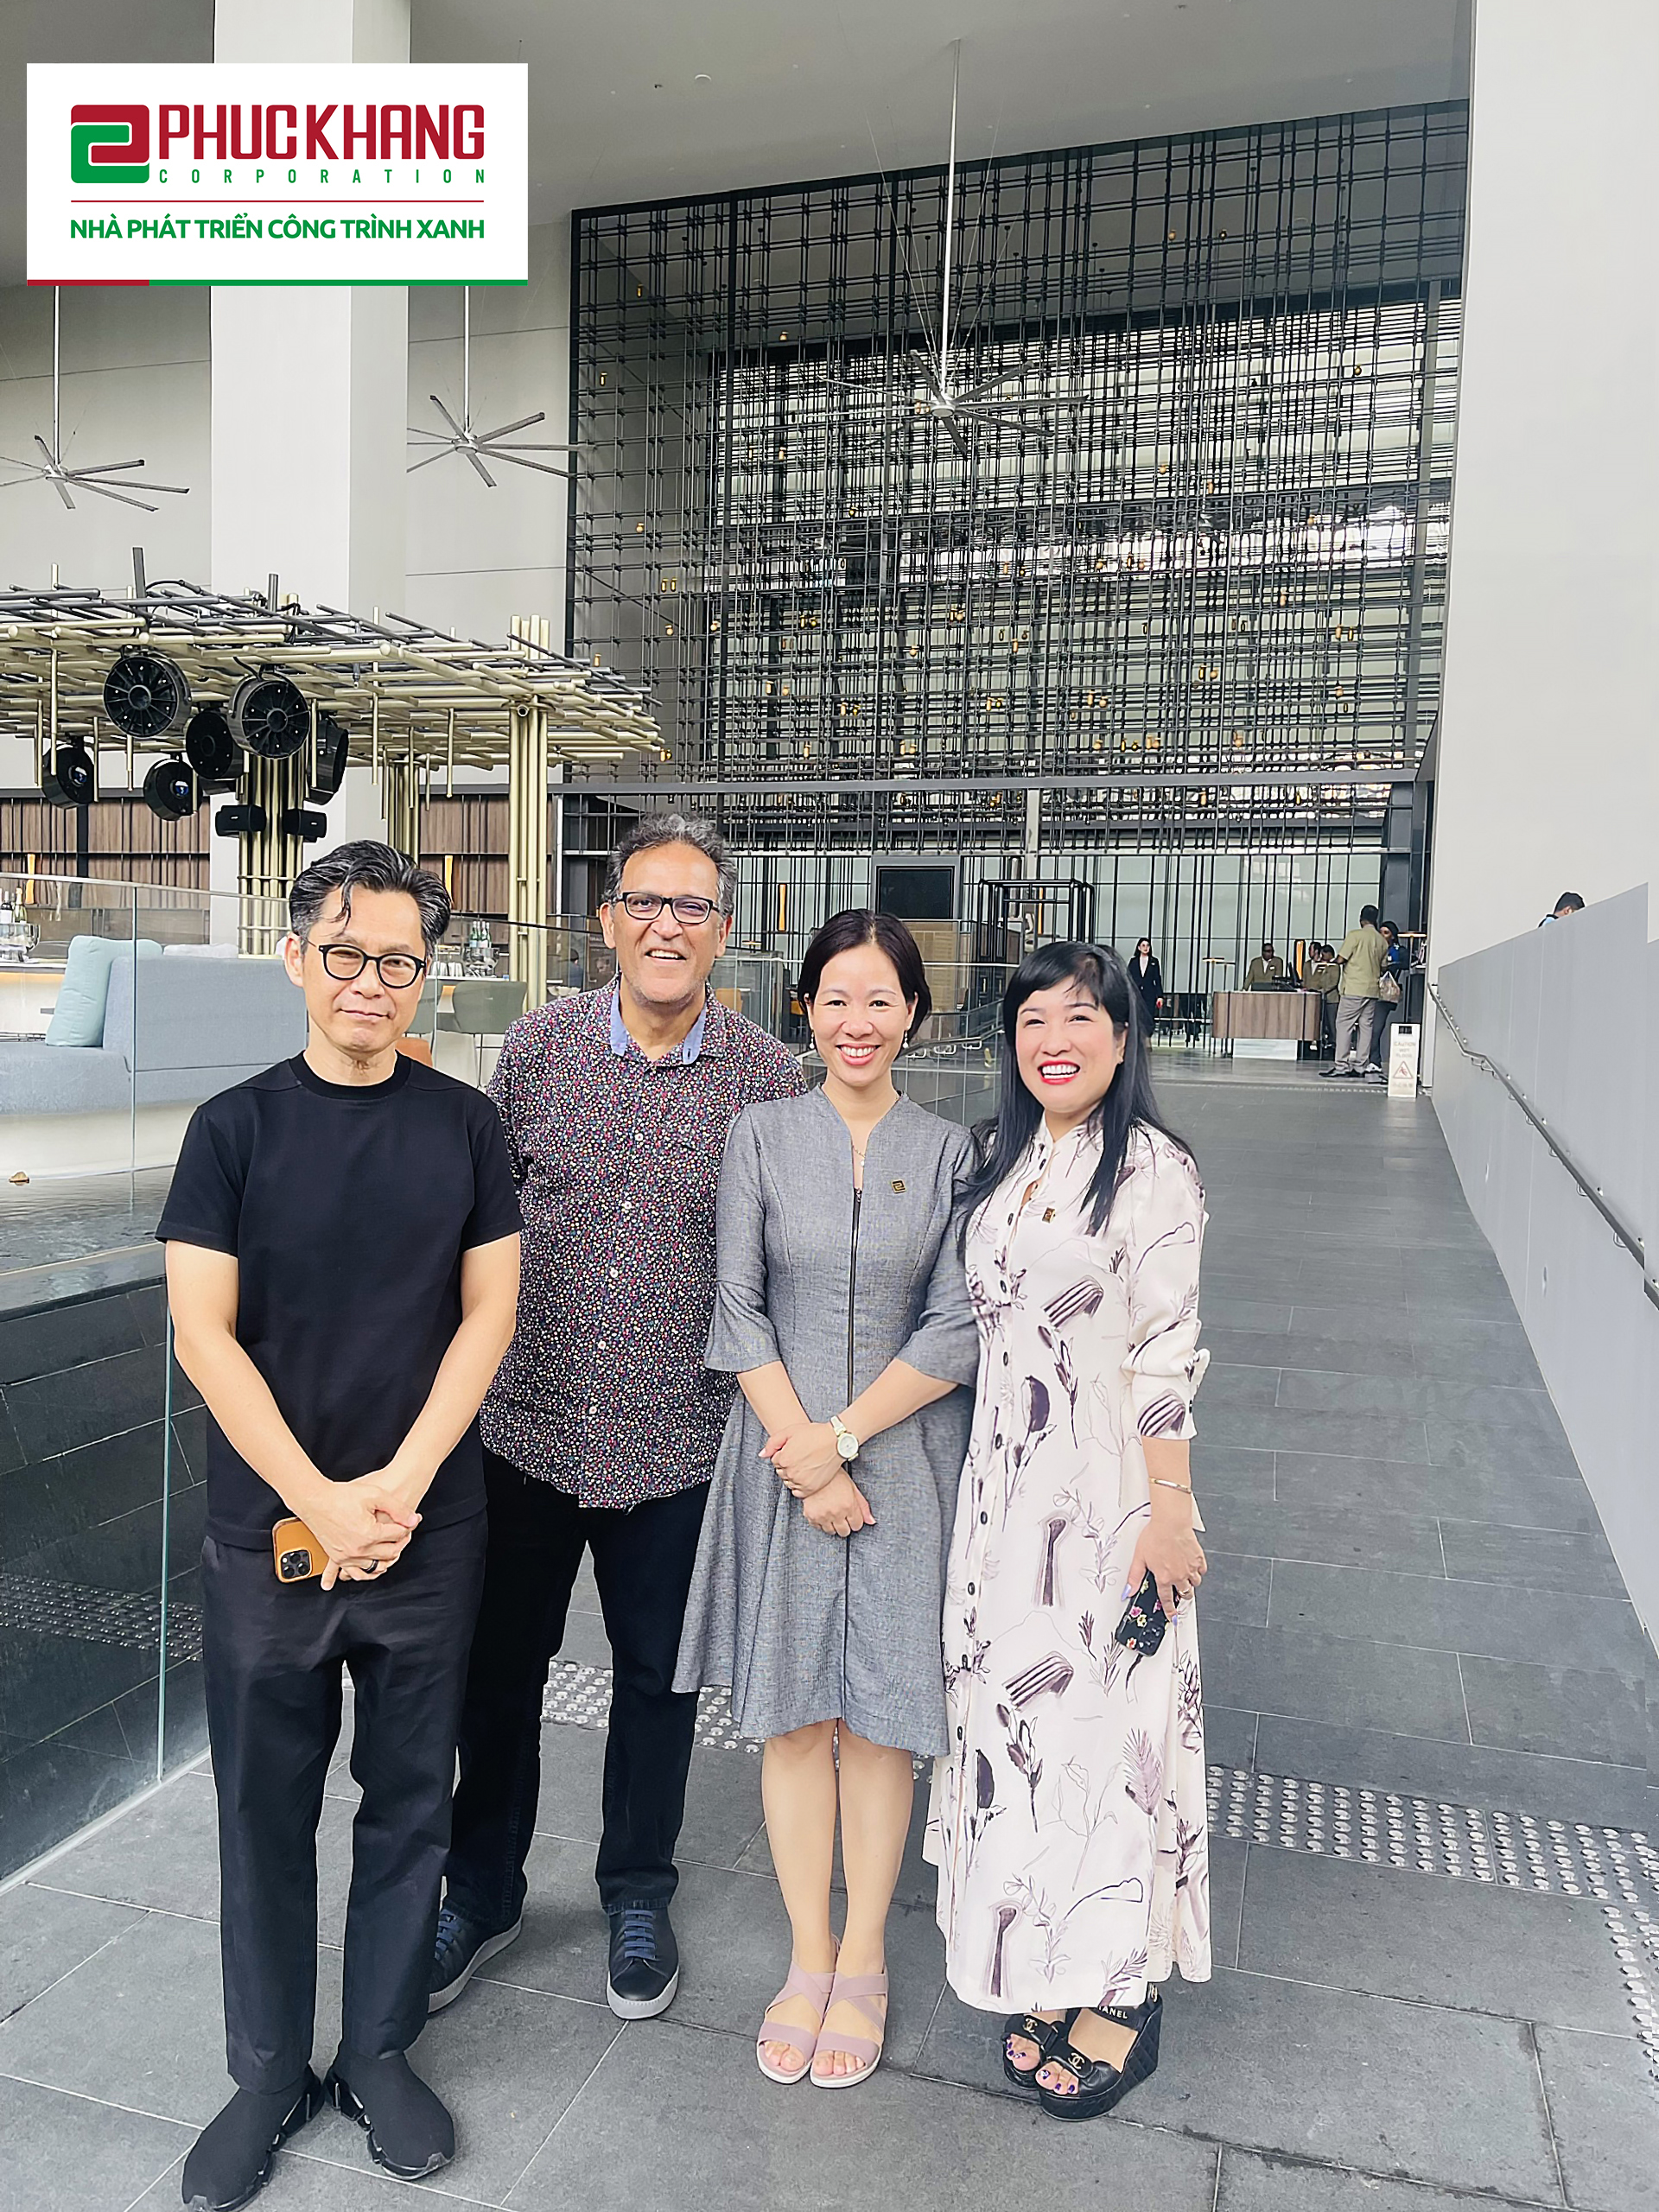 CEO Luu Thi Thanh Mau (R, 1st) visited and worked with architect Mon Summ (L, 1st), Co-founding Director at WOHA and Associate Professor, Dr. Nirmal Kishnani (L, 2nd), former Head of the School of Design and Environment at National University of Singapore.